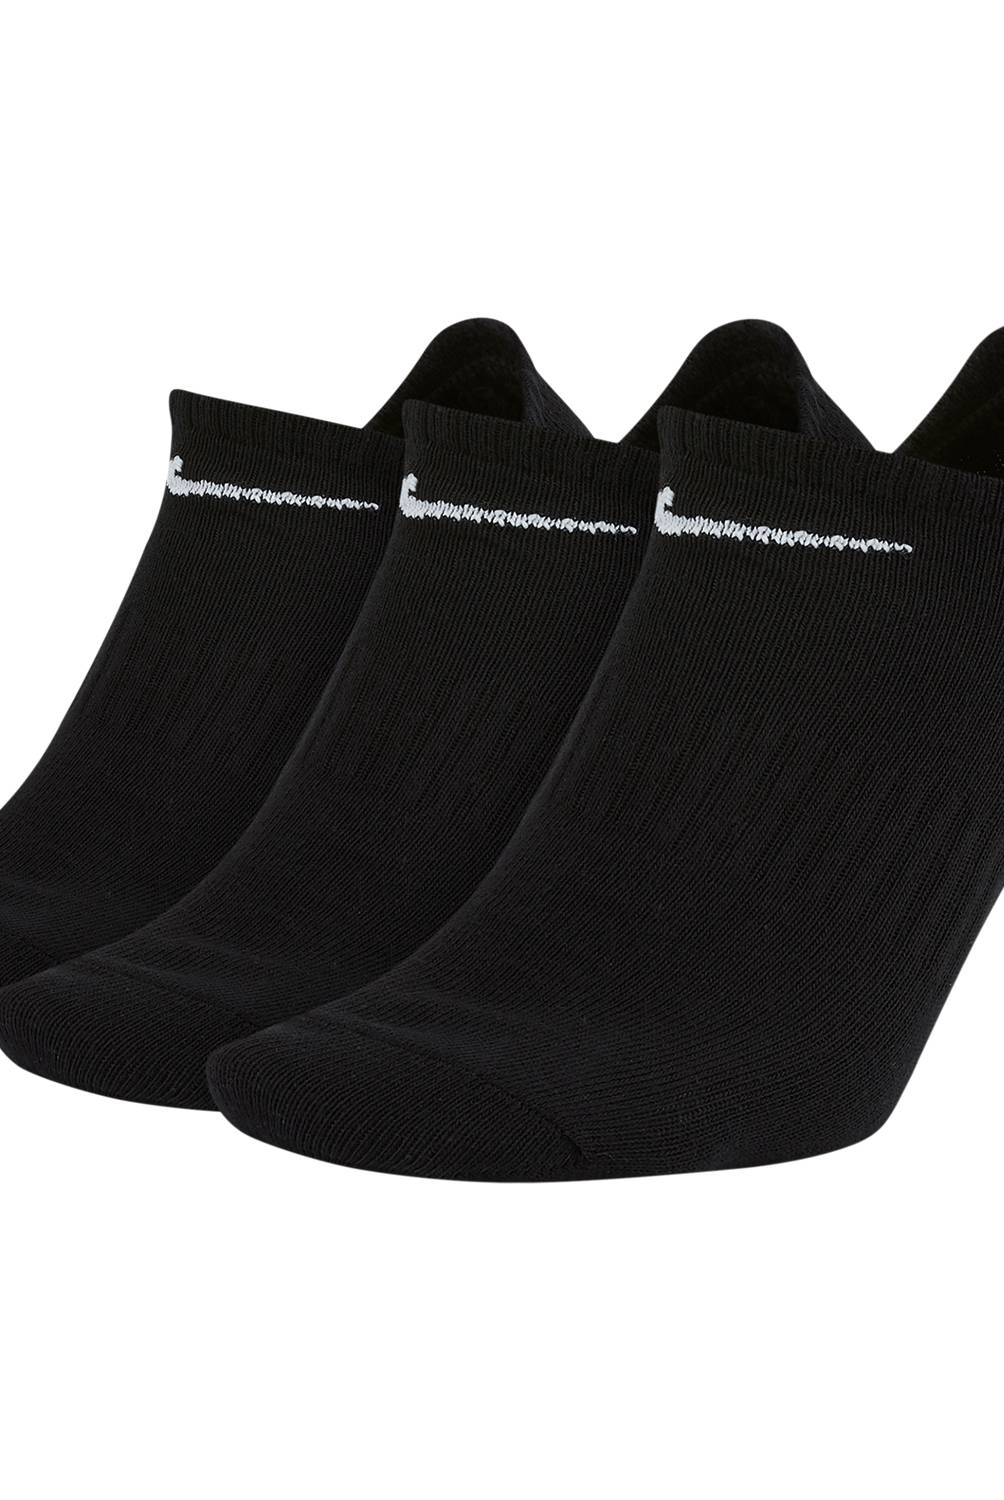 NIKE - Pack De 3 Calcetines Invisibles Deportivos Unisex Nike